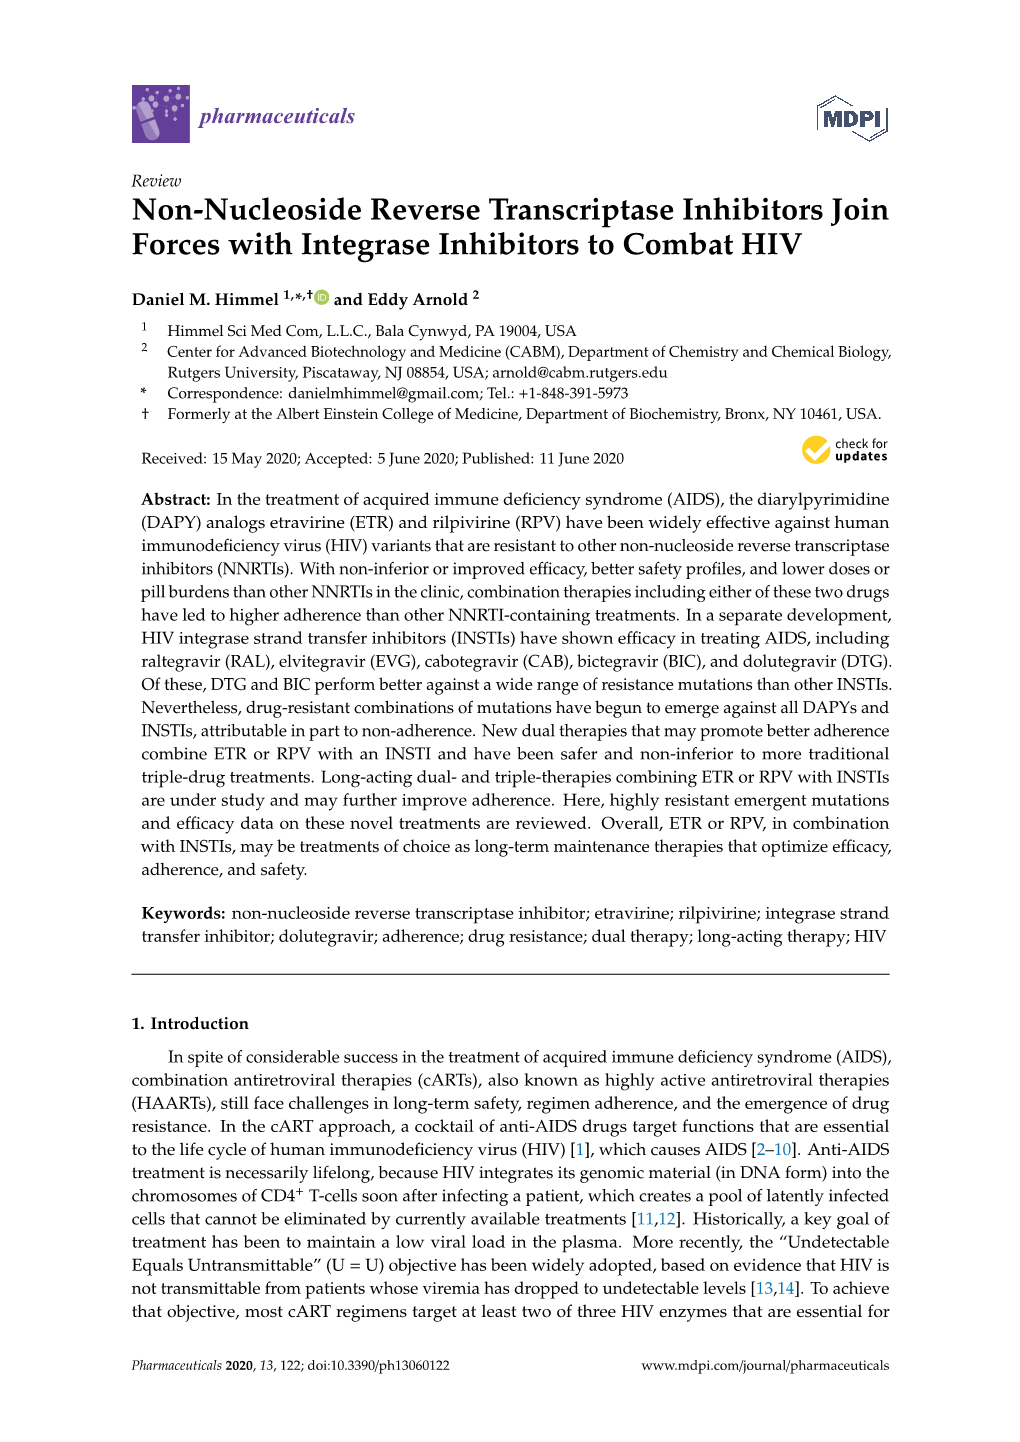 Non-Nucleoside Reverse Transcriptase Inhibitors Join Forces with Integrase Inhibitors to Combat HIV